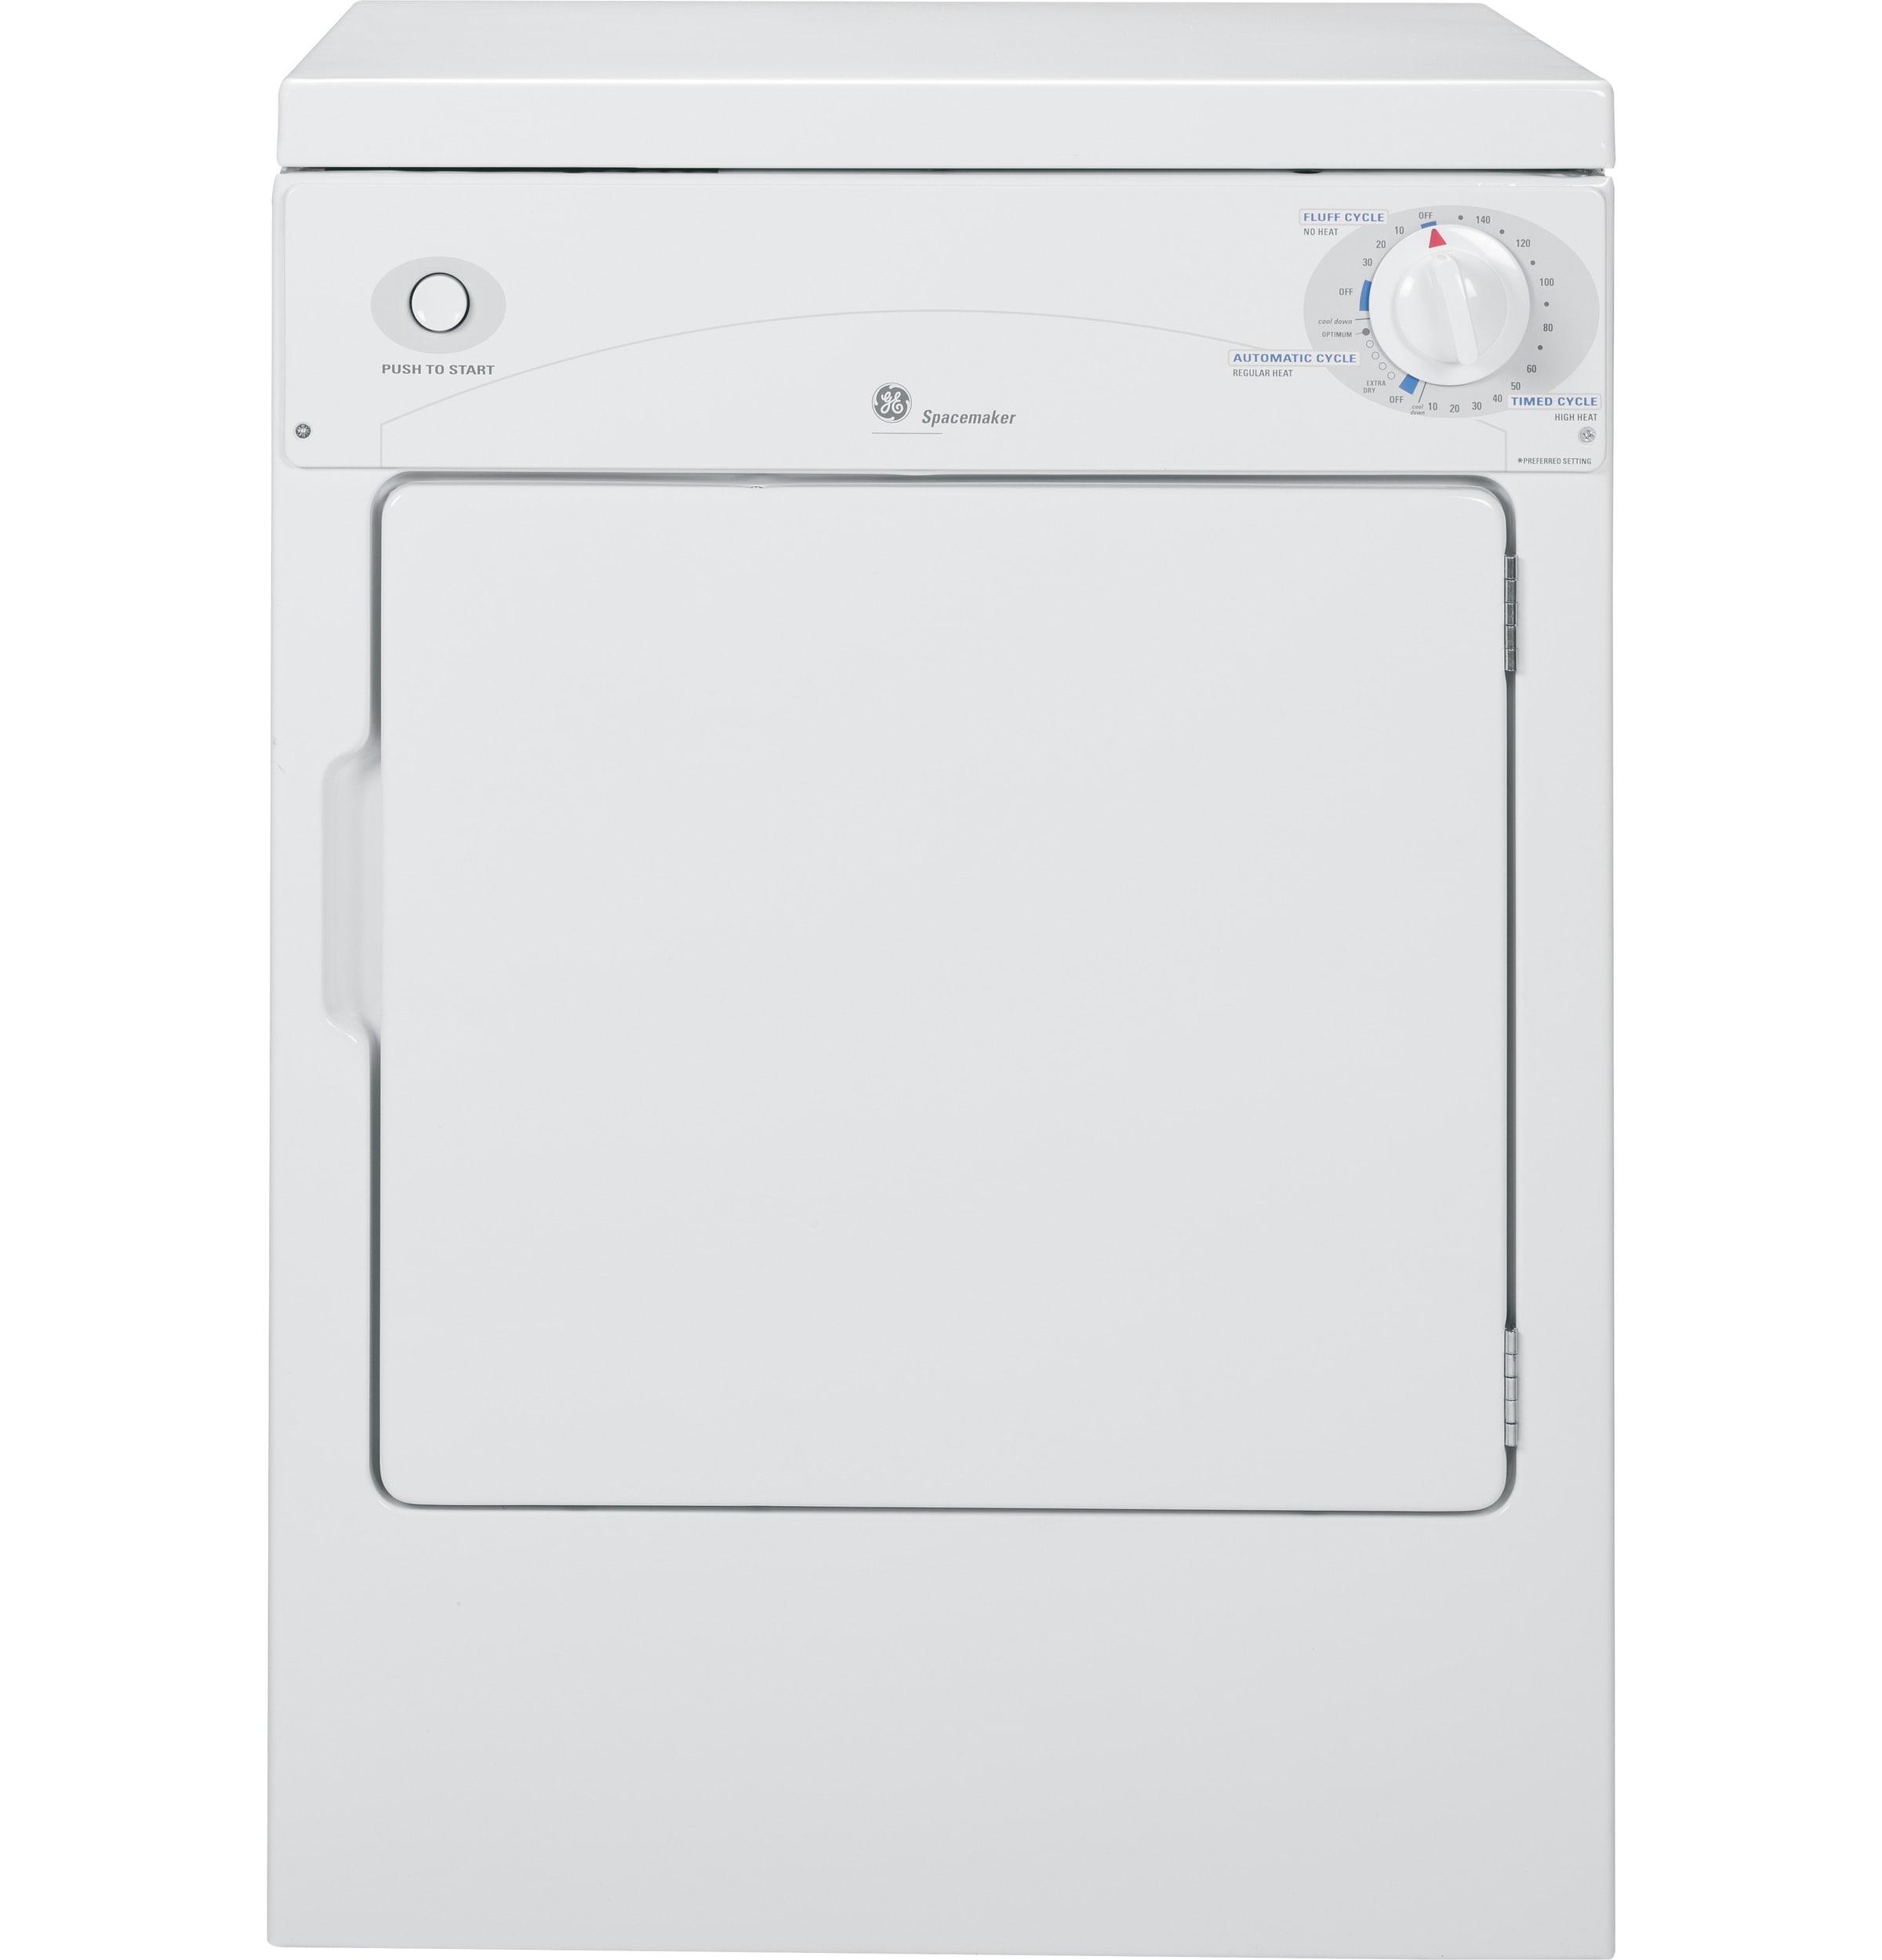 GE 3.6 Cu. Ft. Stackable Electric Dryer with Portable White DSKP333ECWW -  Best Buy